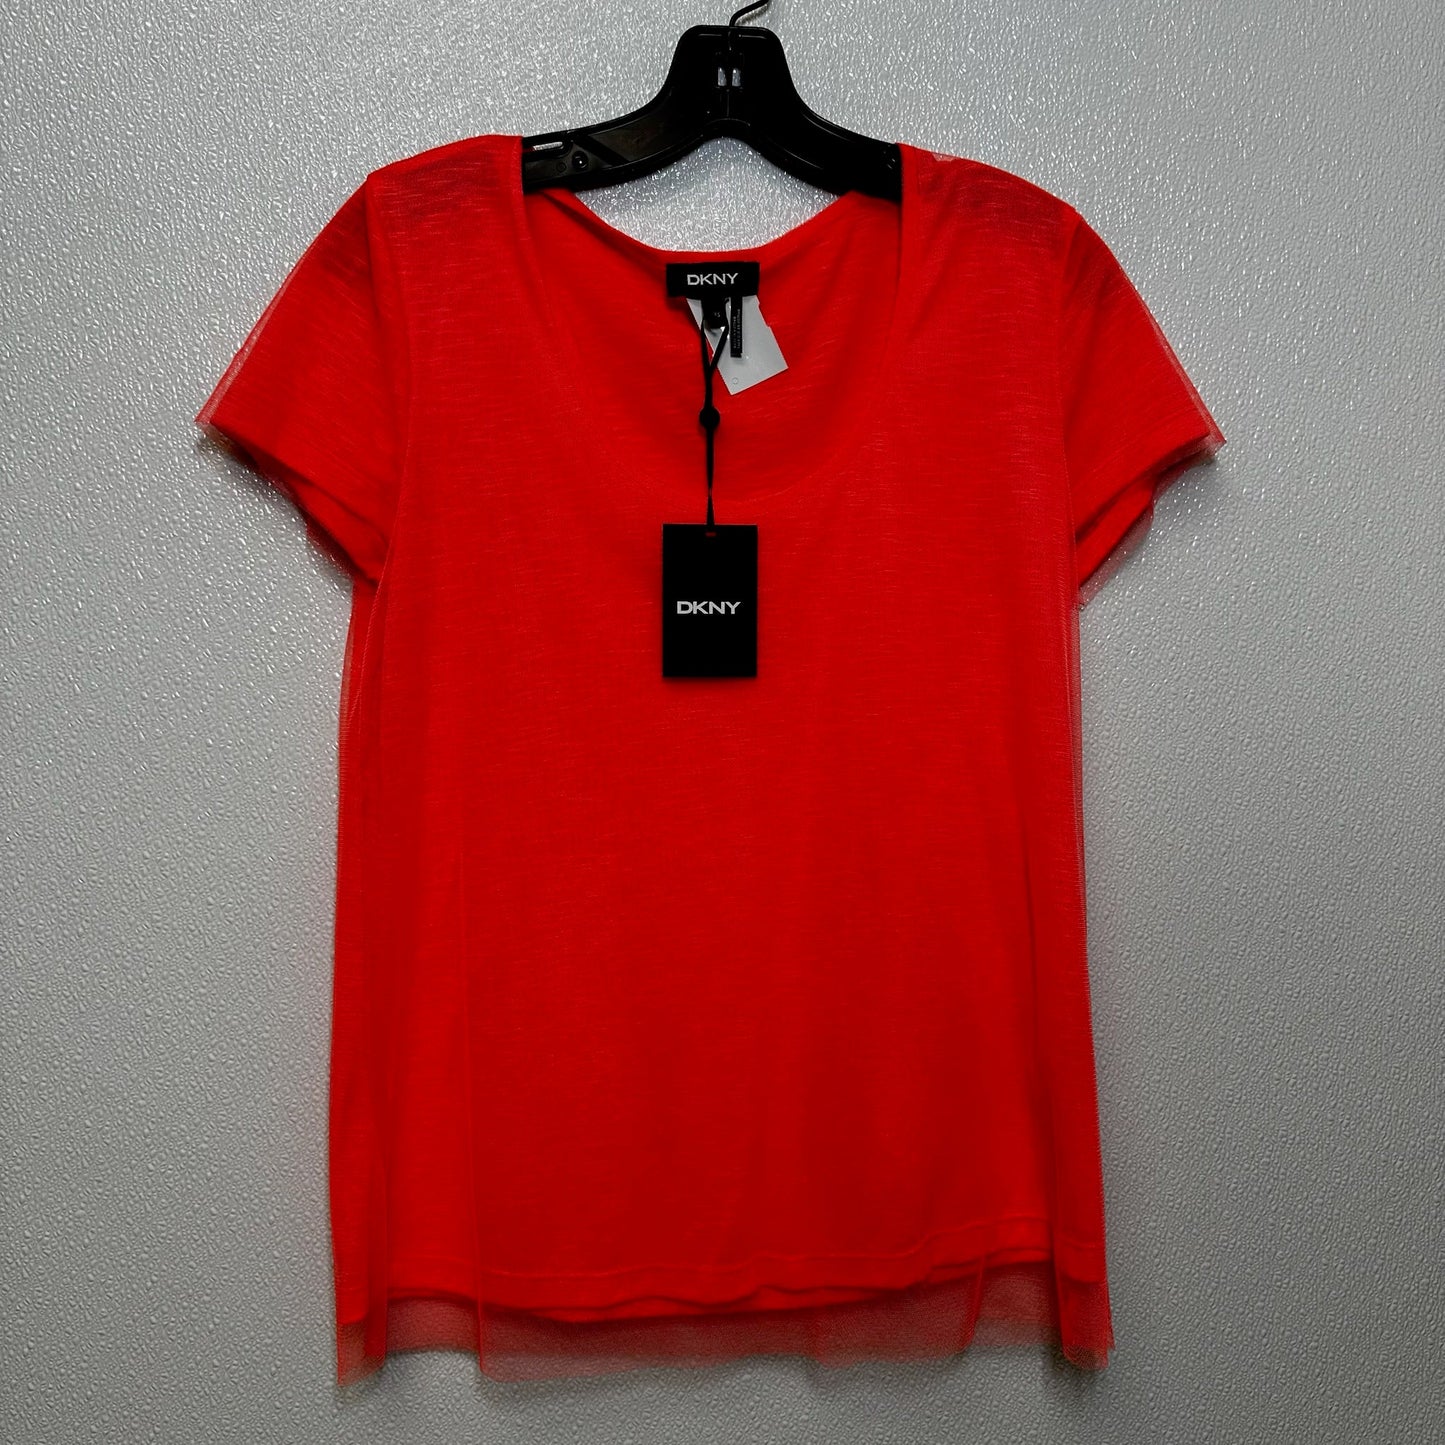 Coral Top Short Sleeve Dkny, Size Xs